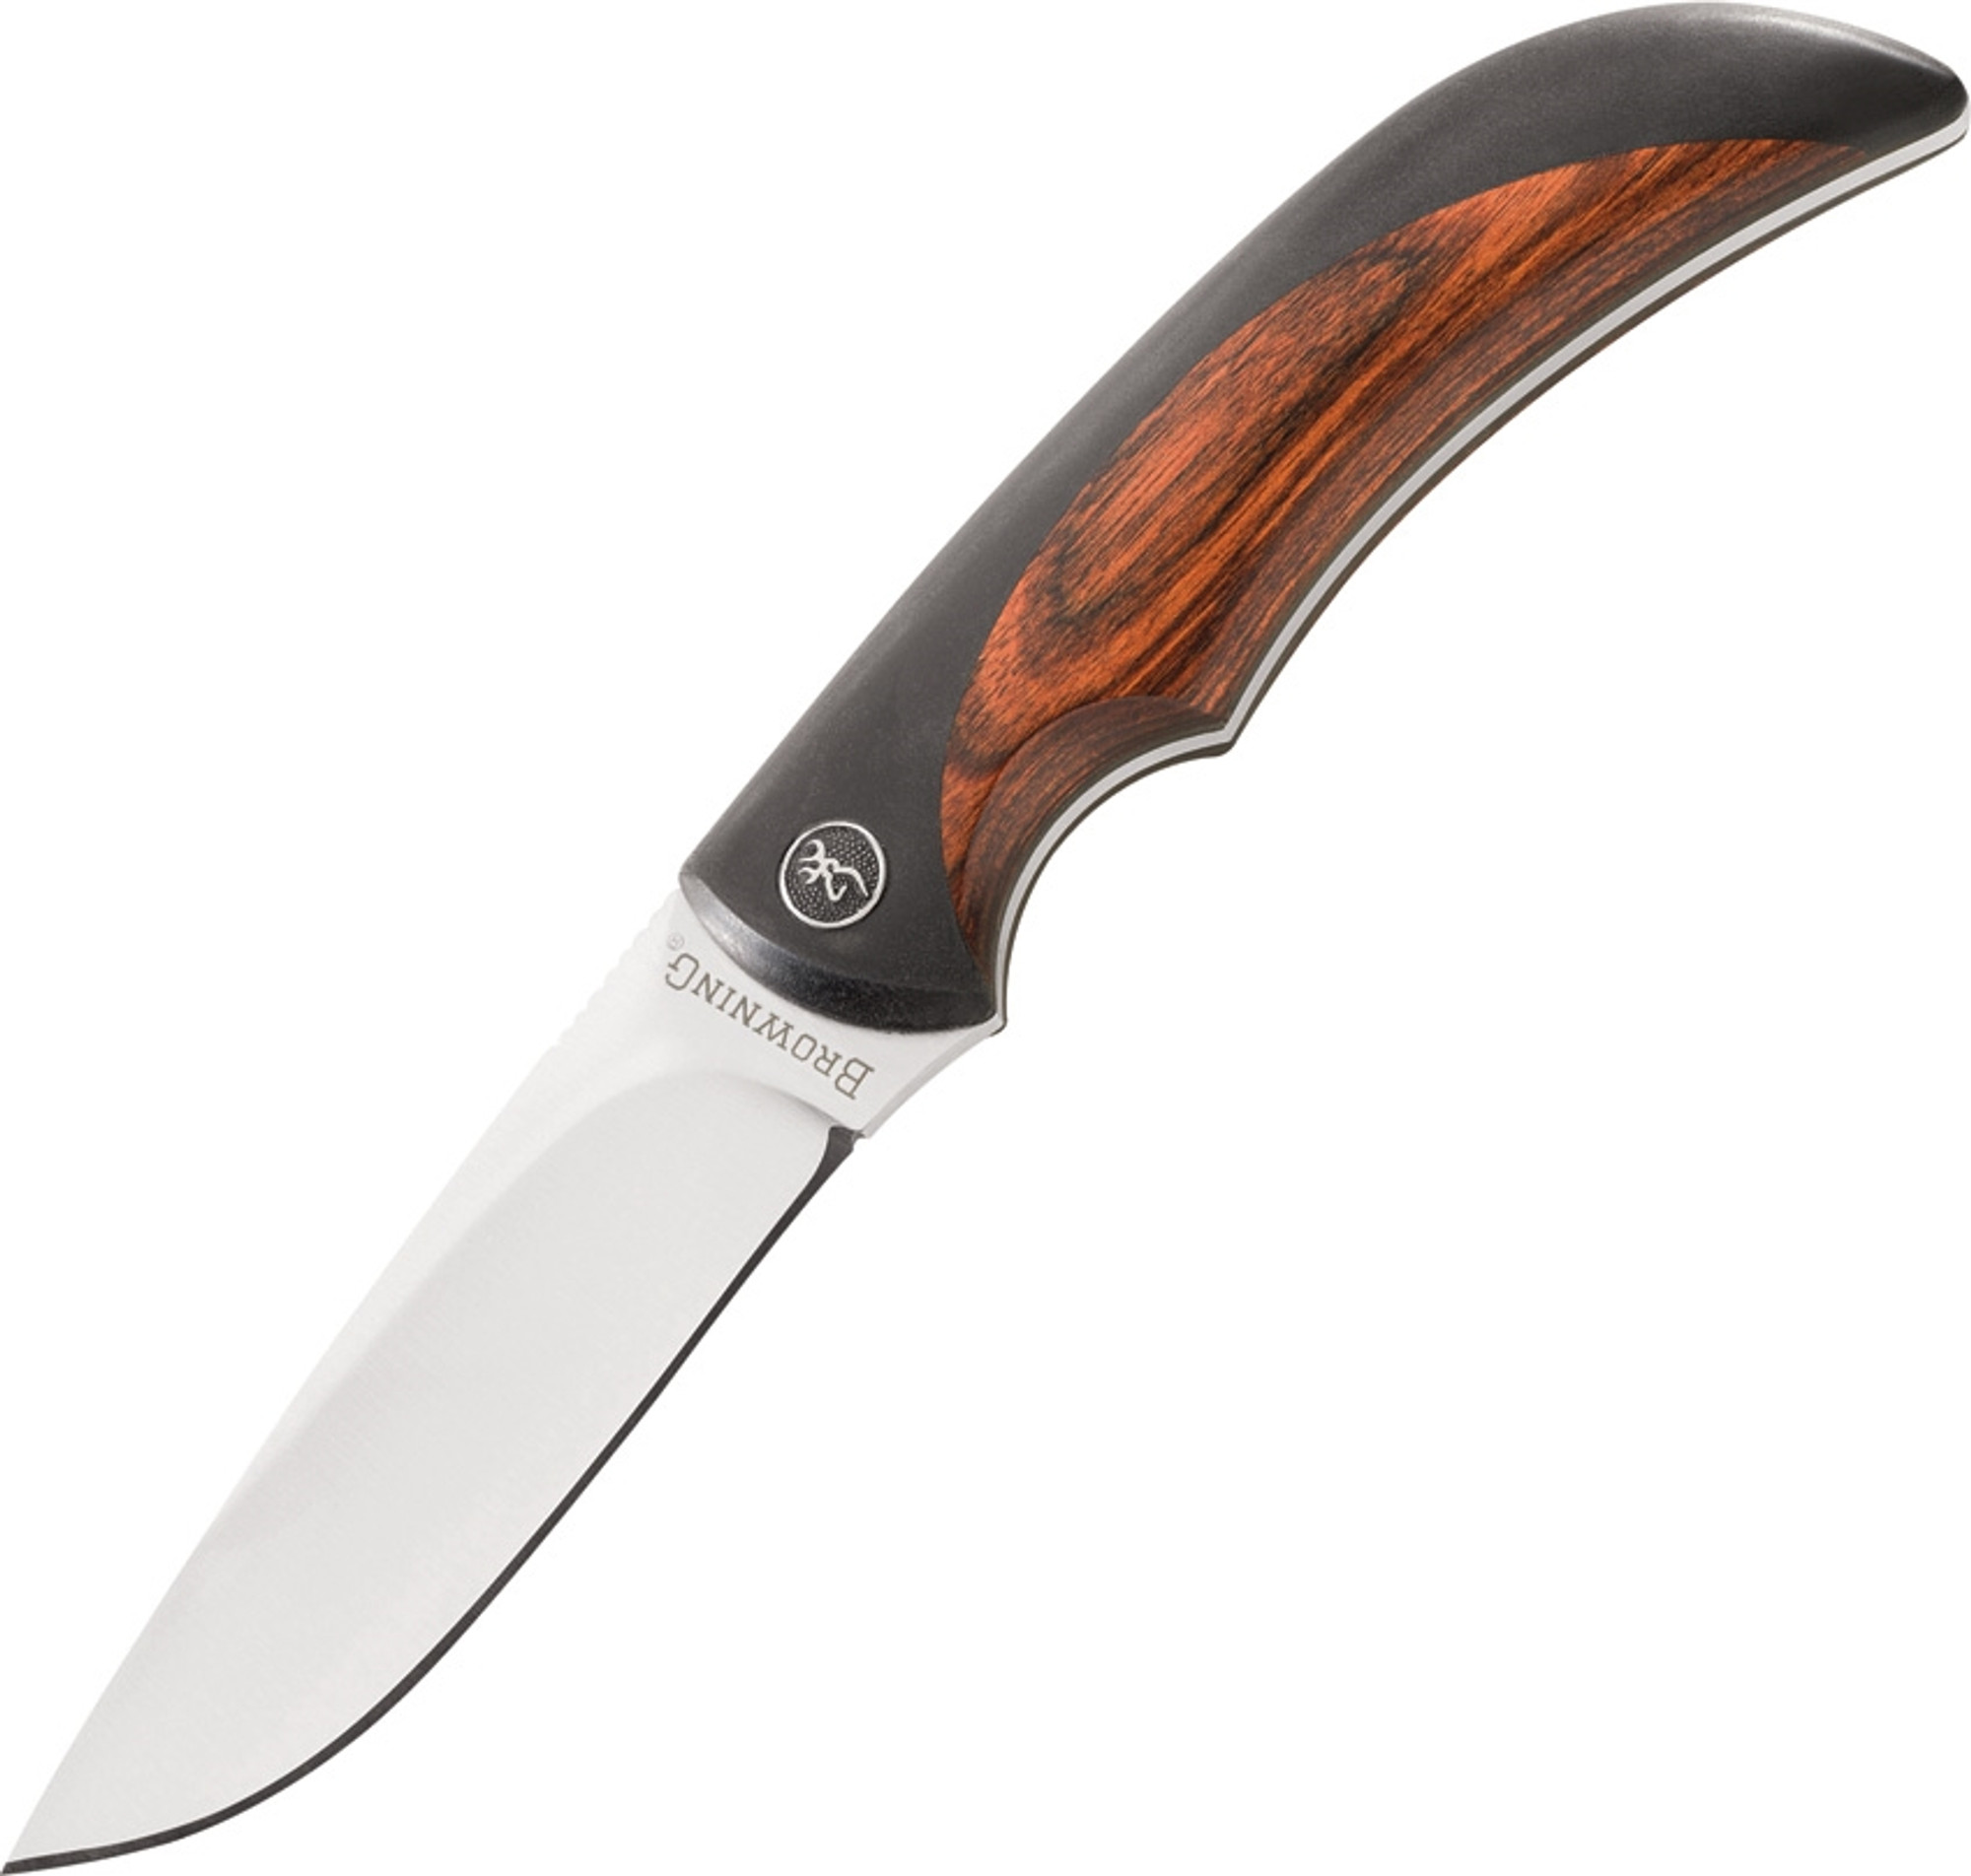 Featherweight Fixed Blade